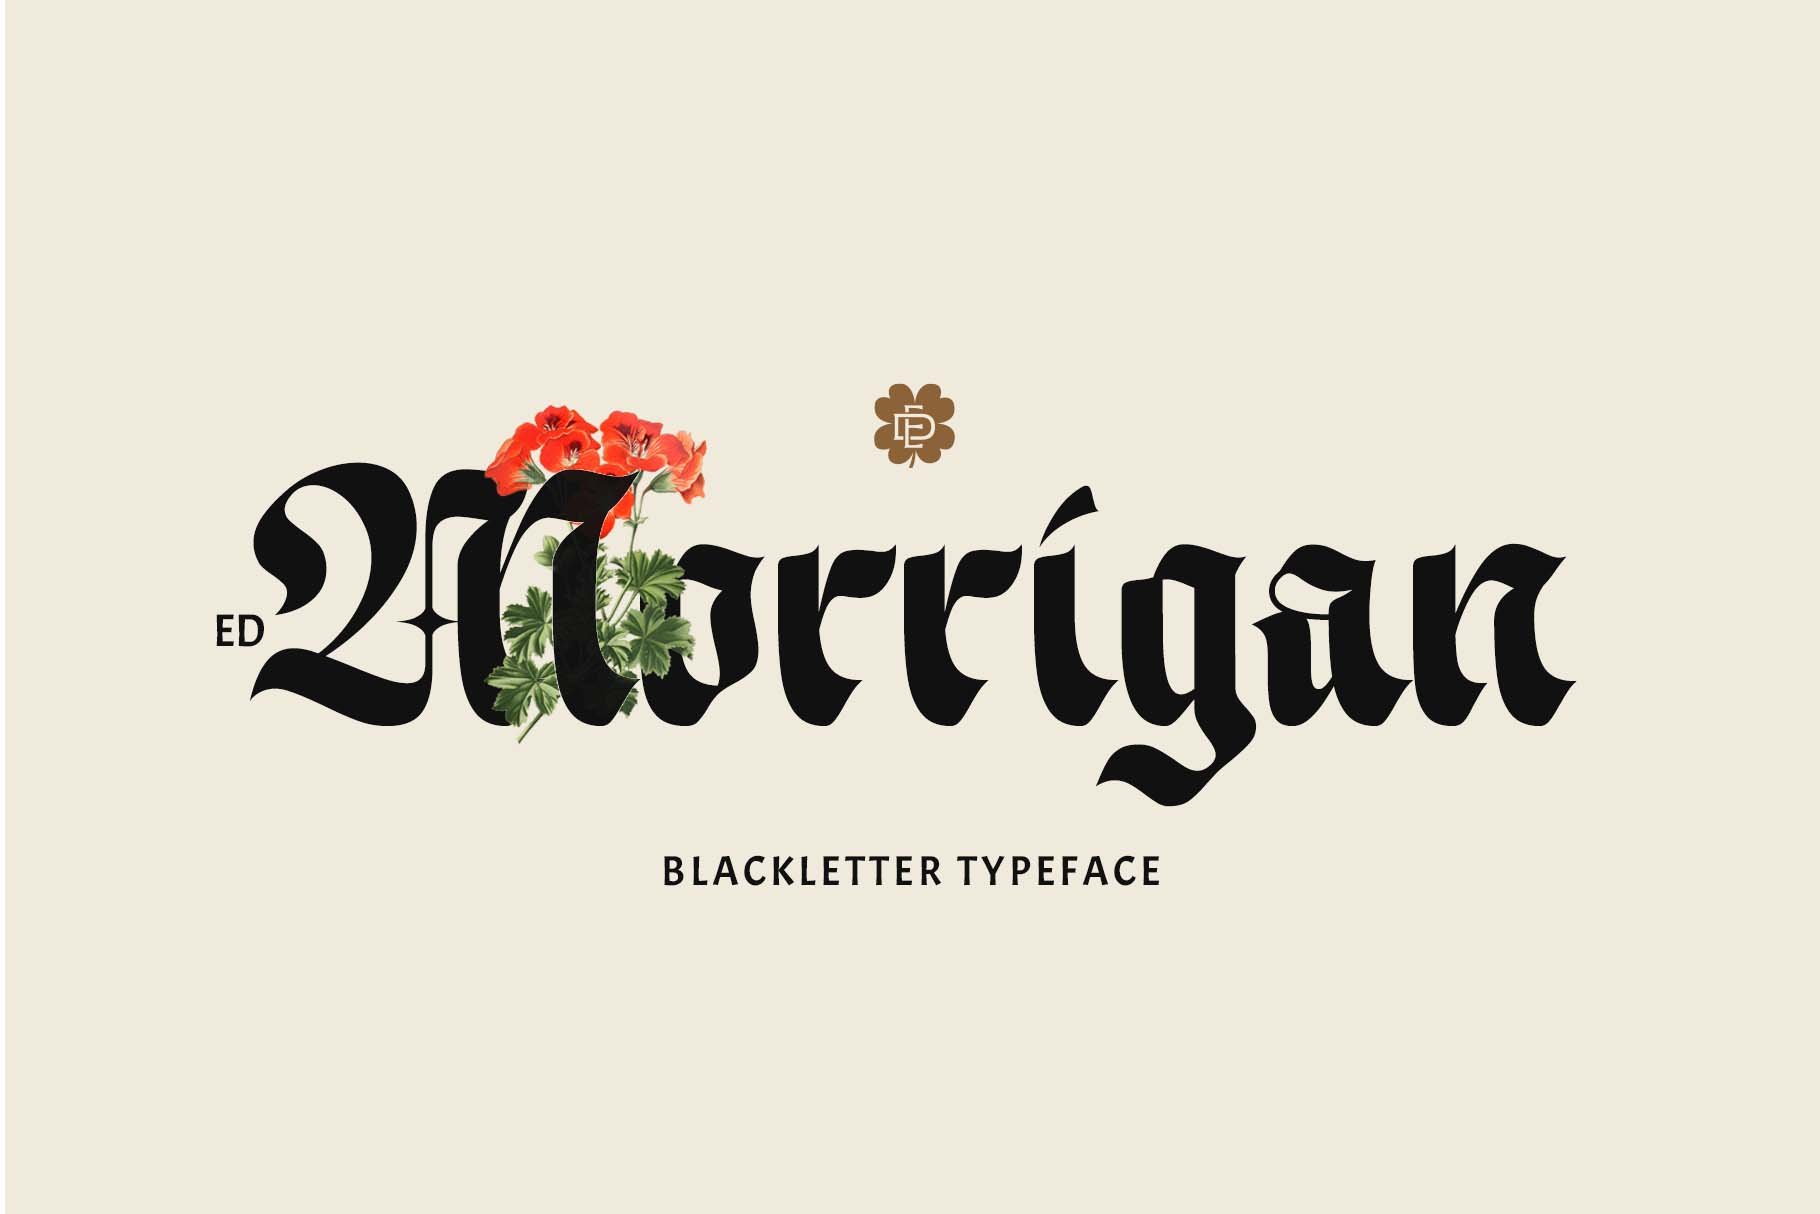 ED Morrigan Typeface preview image.